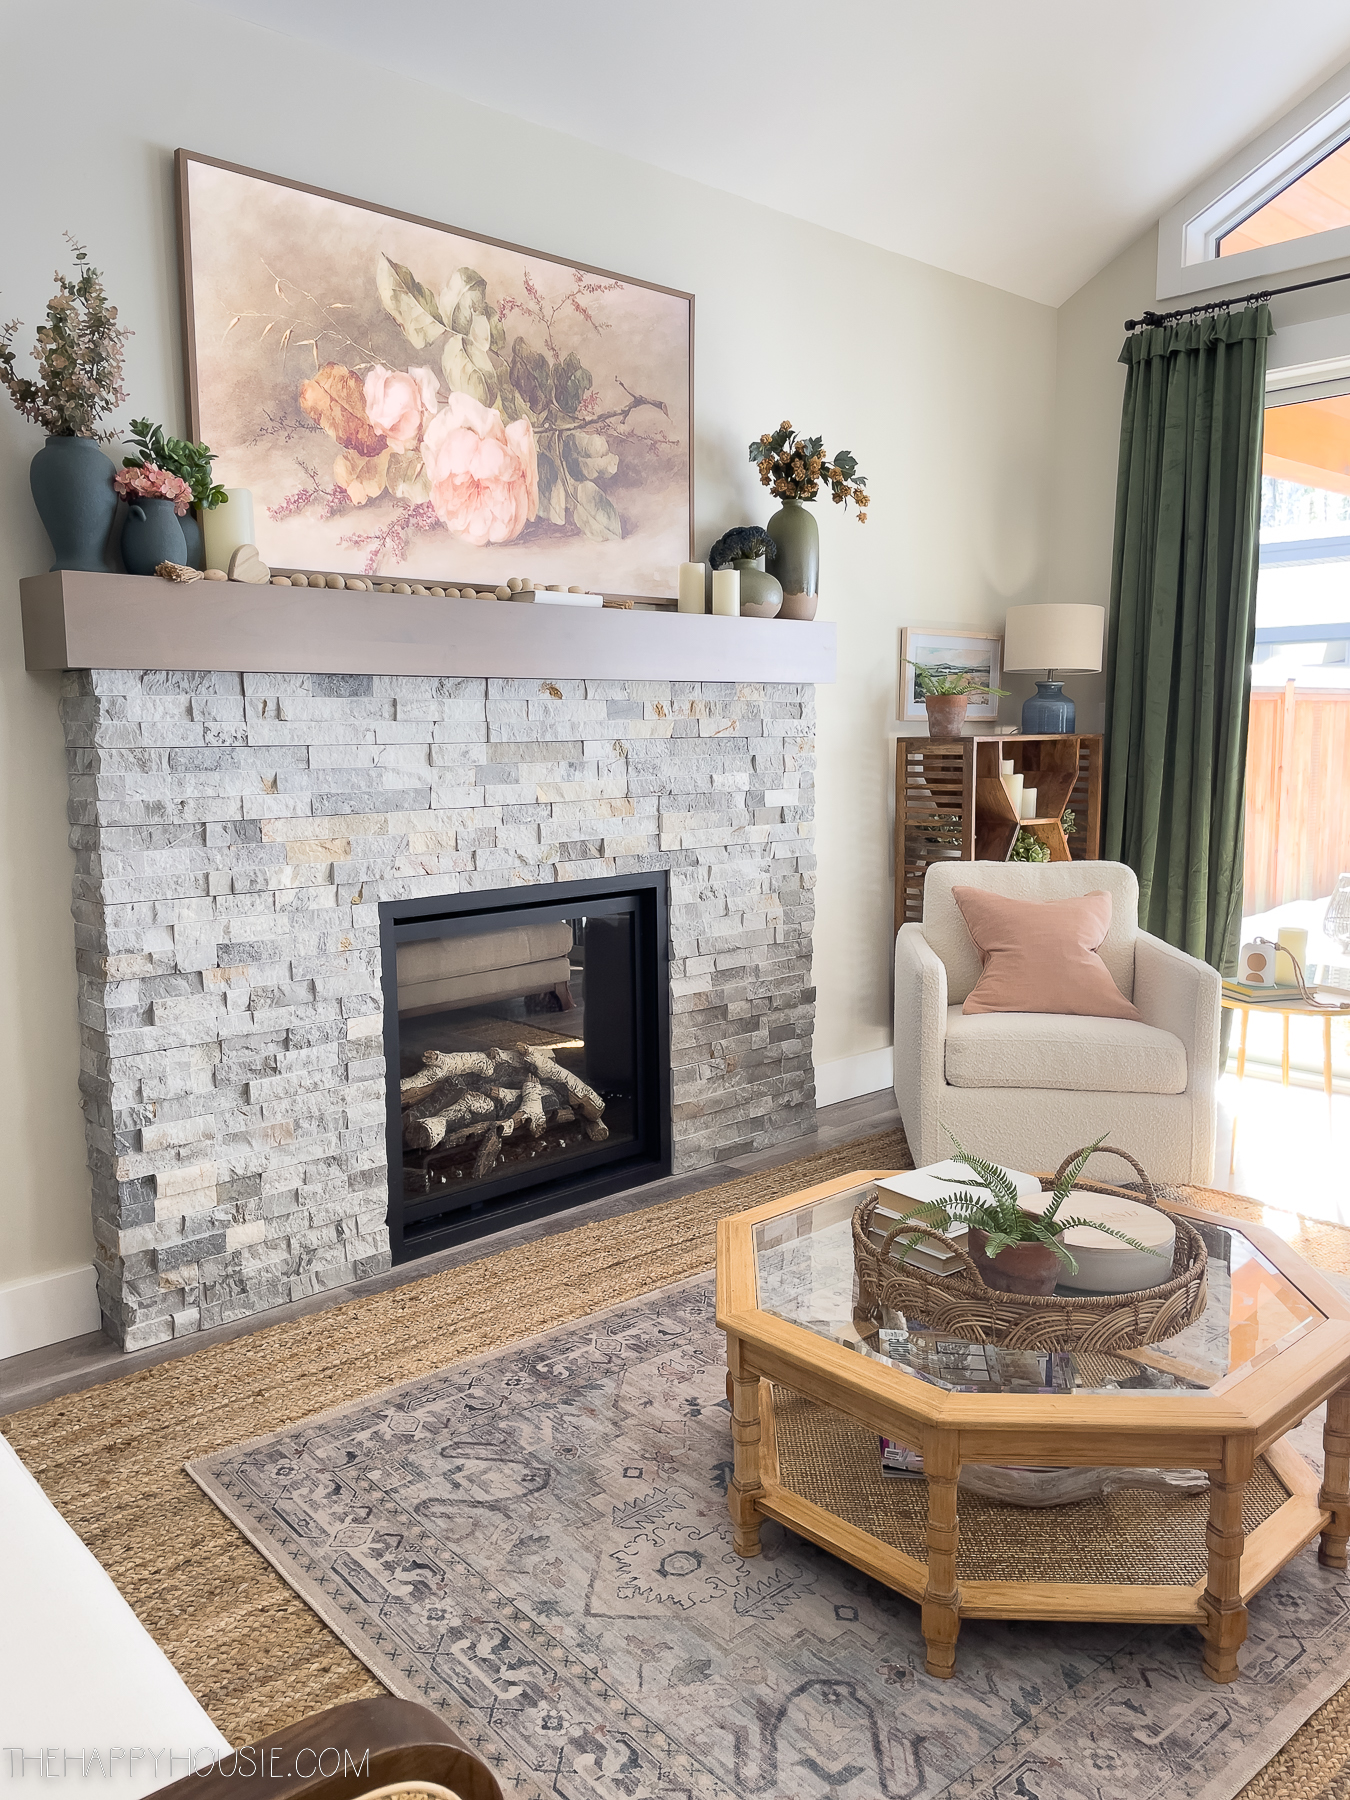 Fireplace on wall in living room space with walls painted Halo, an off-white neutral with green-grey undertones 